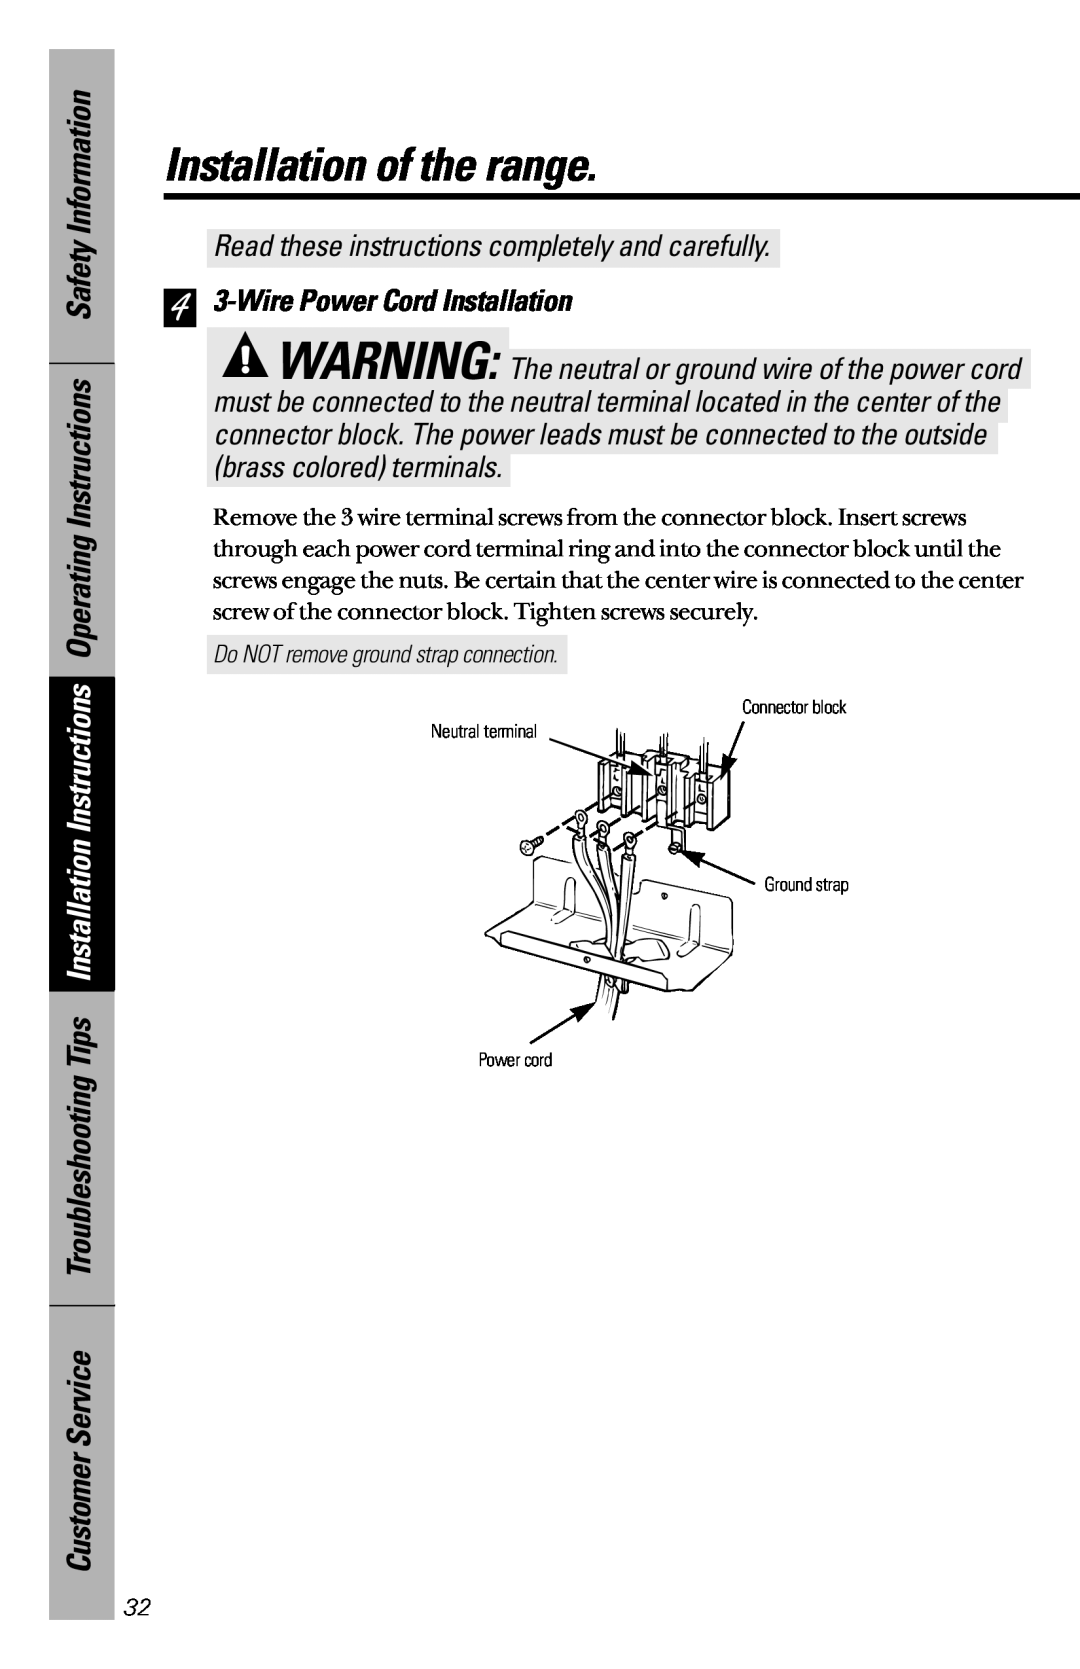 GE JBP45 4 3-Wire Power Cord Installation, Installation of the range, Read these instructions completely and carefully 